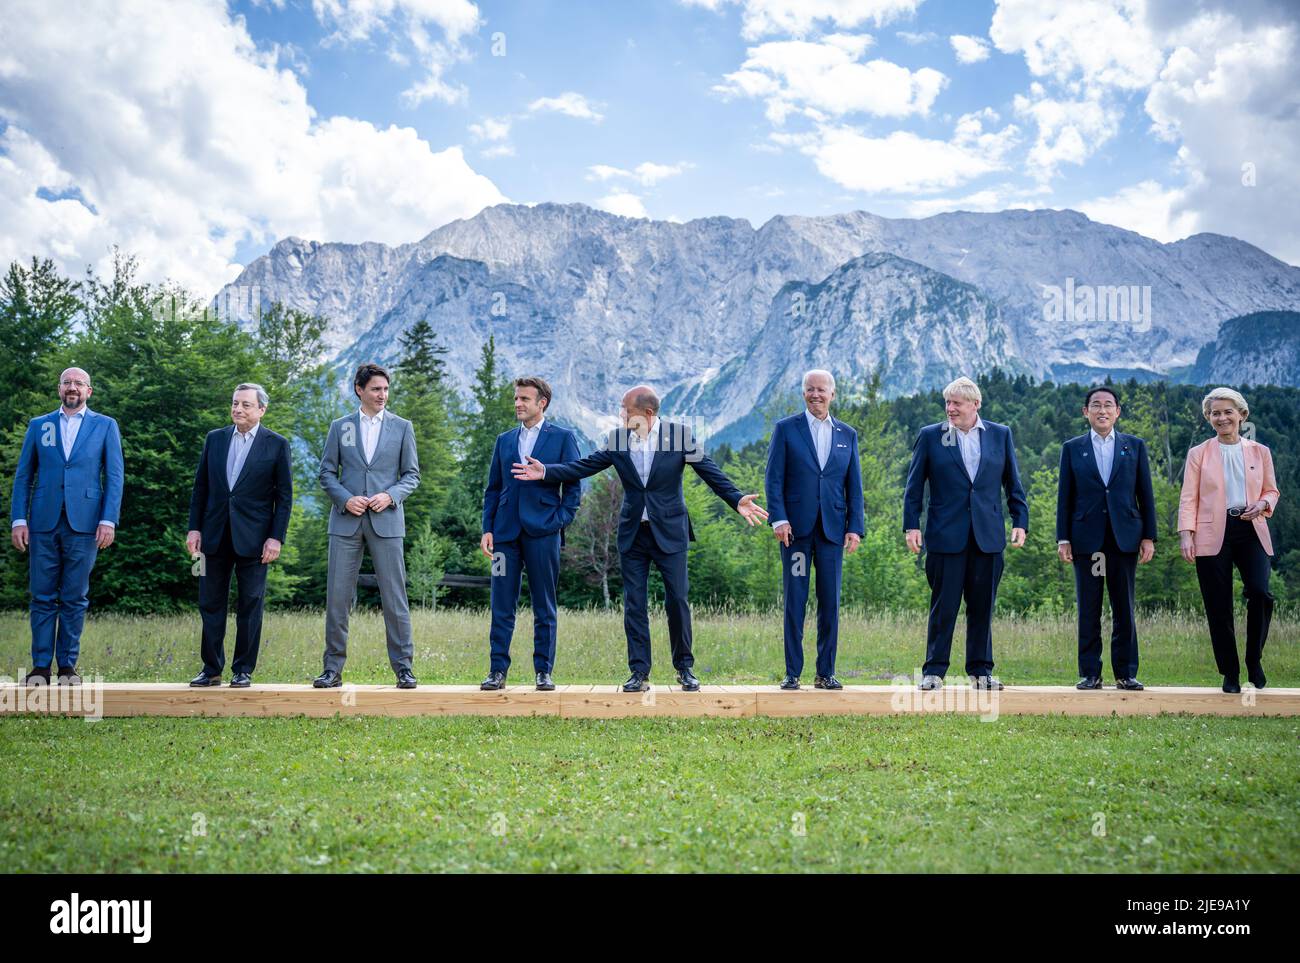 26 June 2022, Bavaria, Elmau: Charles Michel (l-r), President of the European Council, Mario Draghi, Prime Minister of Italy, Justin Trudeau, Prime Minister of Canada, Emmanuel Macron, President of France, German Chancellor Olaf Scholz (SPD), Joe Biden, President of the United States, Boris Johnson, Prime Minister of the United Kingdom, Fumio Kishida, Prime Minister of Japan, and Ursula von der Leyen, President of the European Commission (EU), stand together for the family photo during the G7 Summit at Schloss Elmau. Germany is hosting the G7 summit of economically strong democracies from Jun Stock Photo